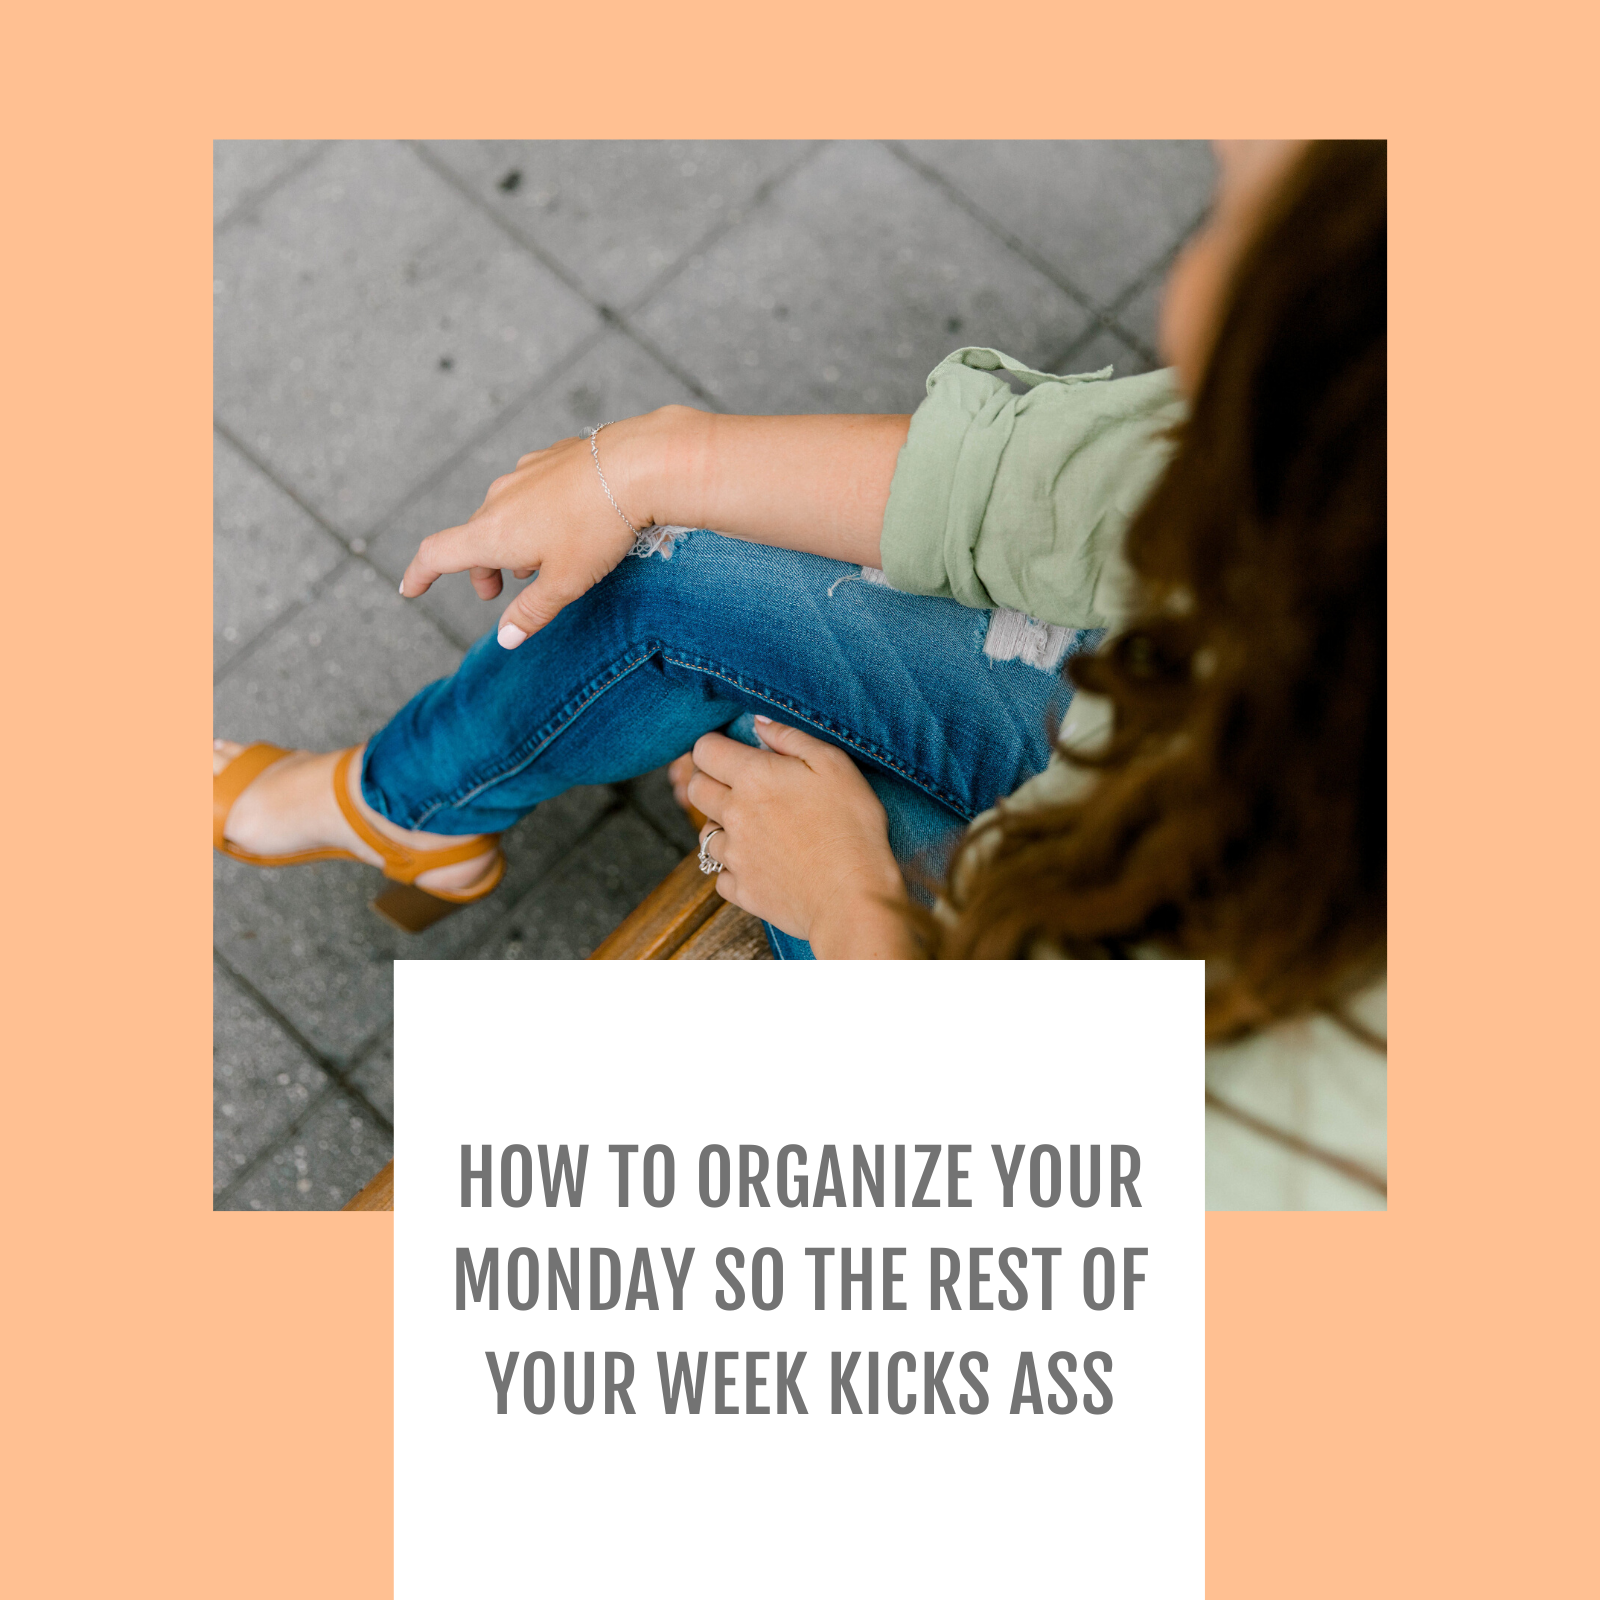 Episode #050-How to organize your Monday so the rest of your week kicks ass